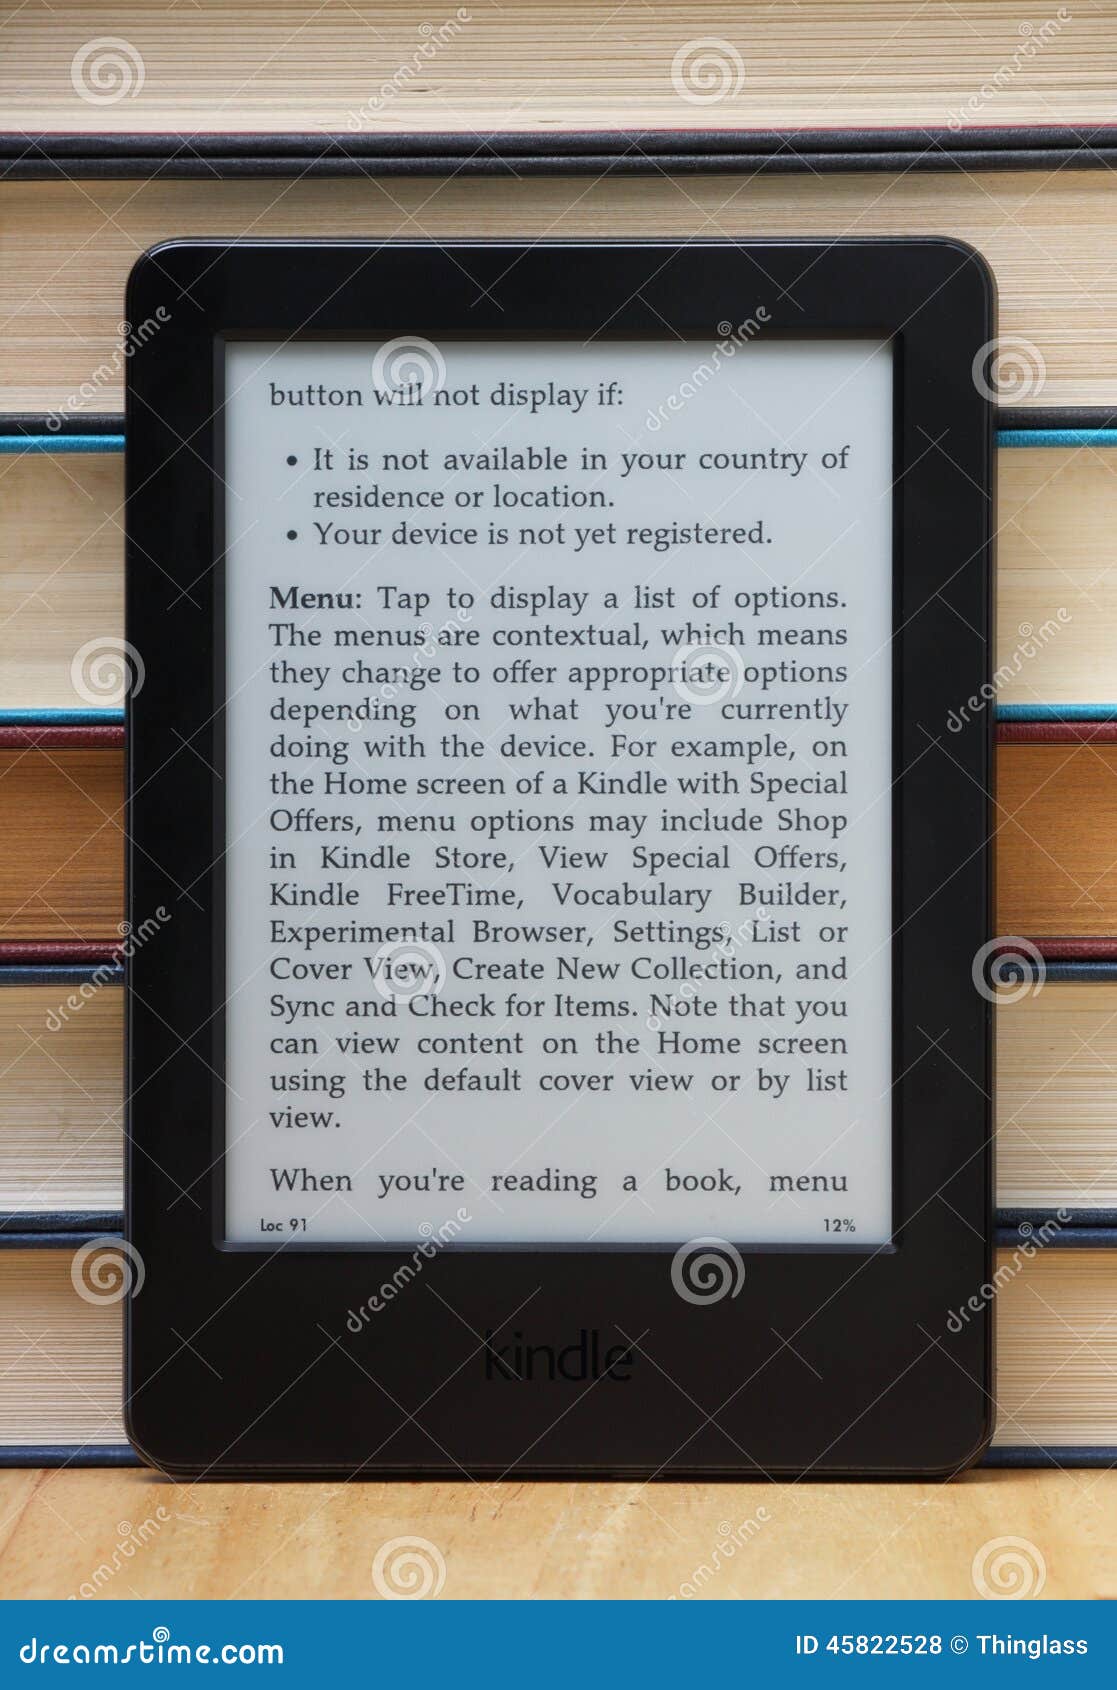 Your e-reader can display more than just books